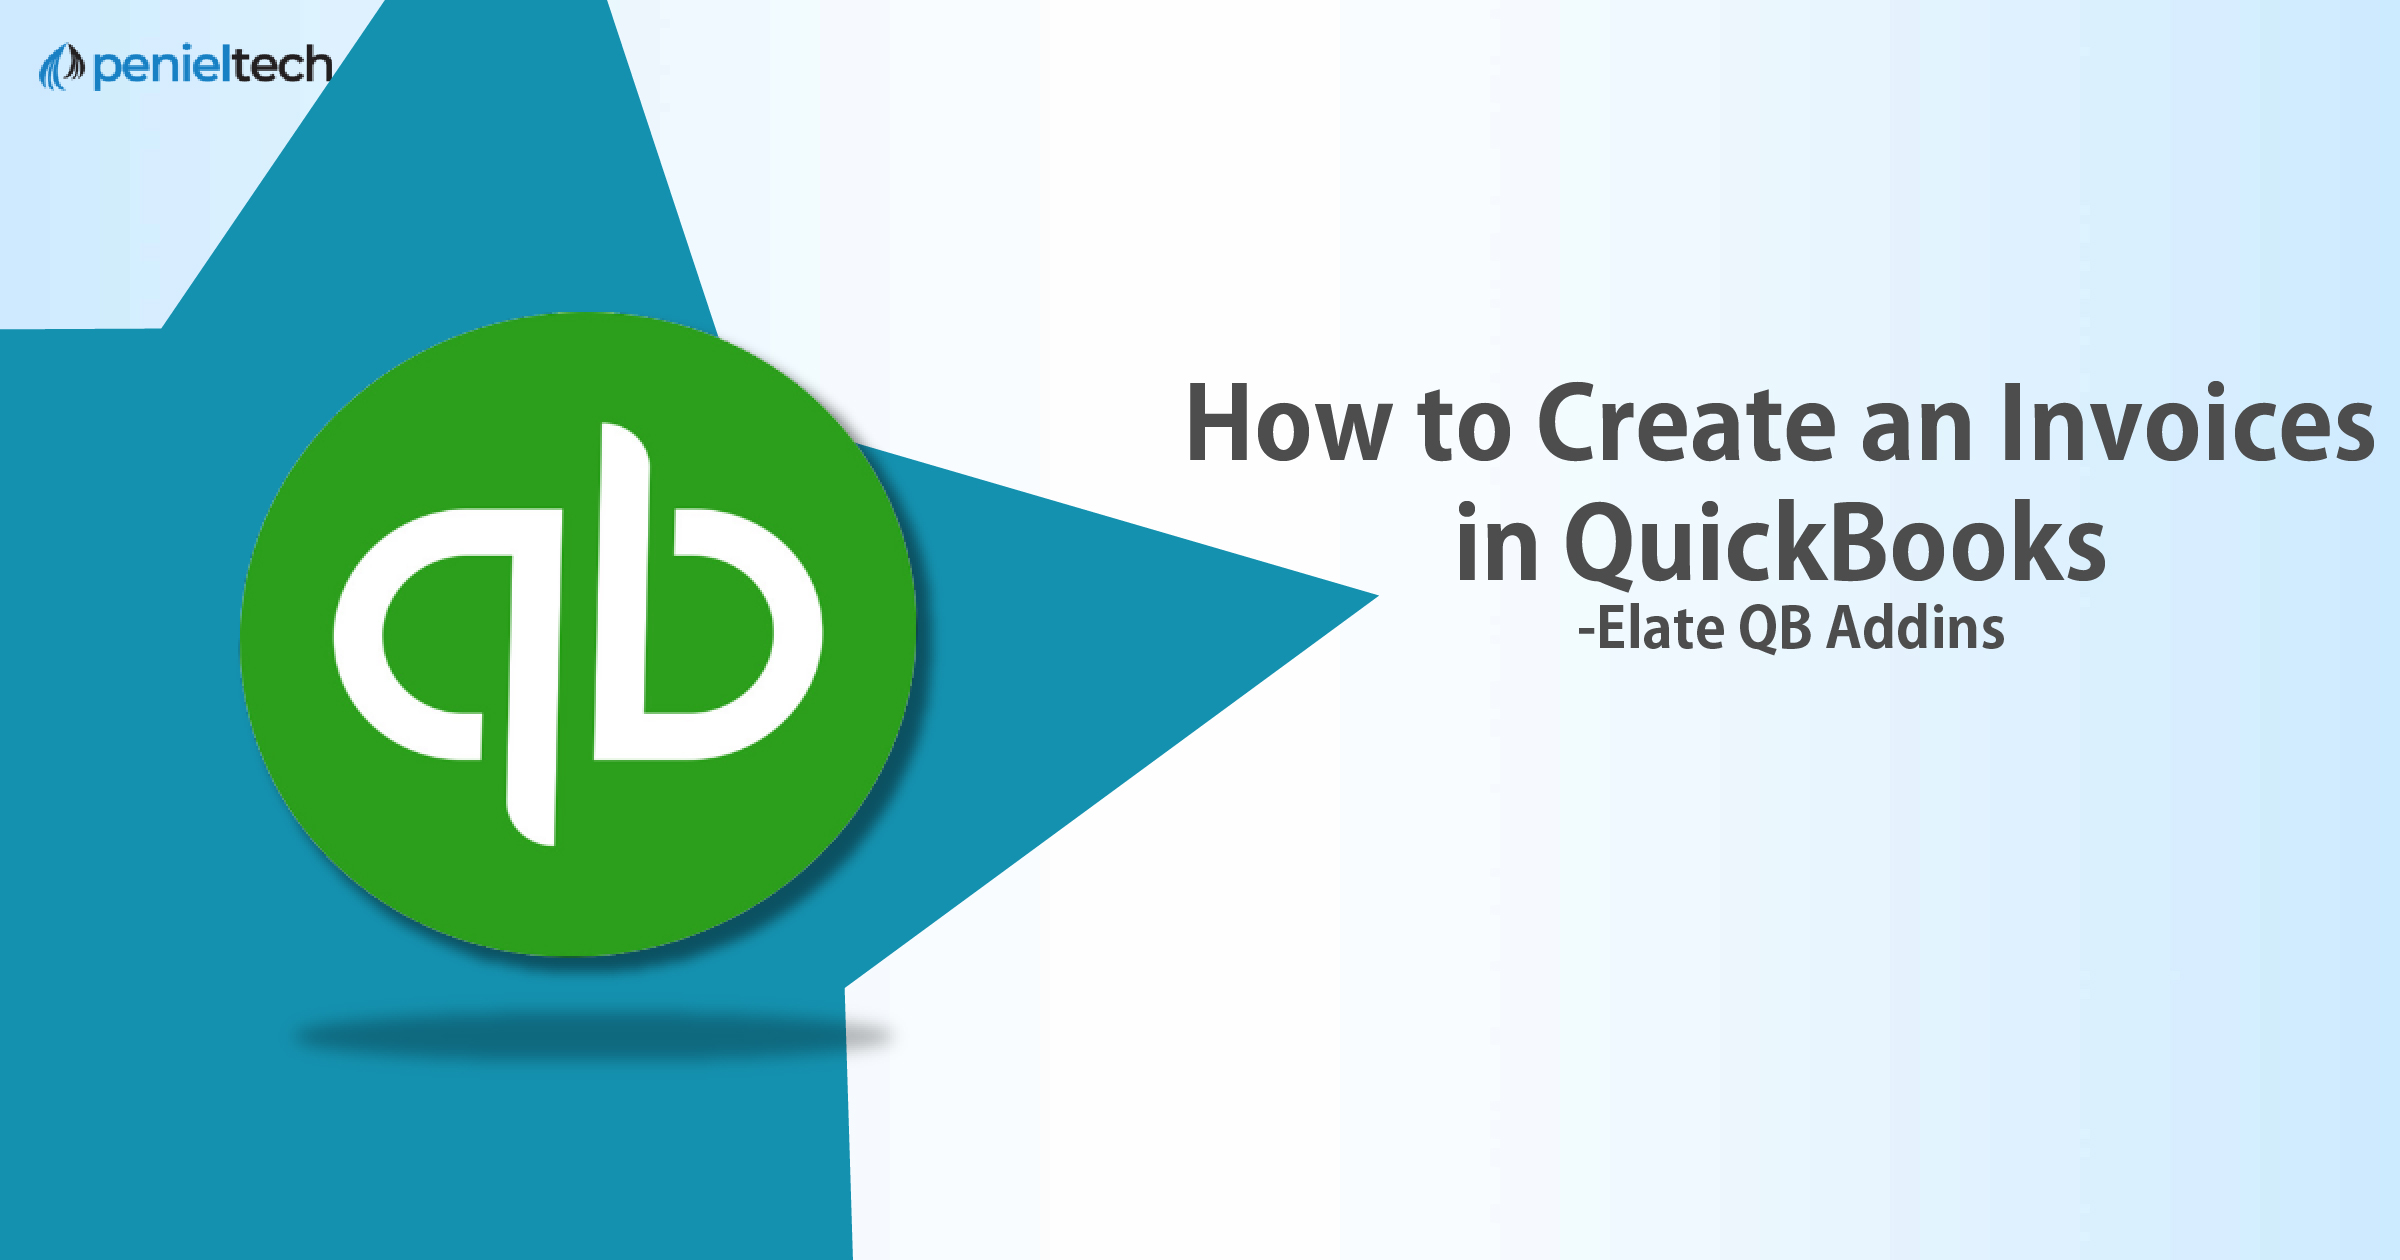 How to Create an Invoices in QuickBooks - Elate QB Addins